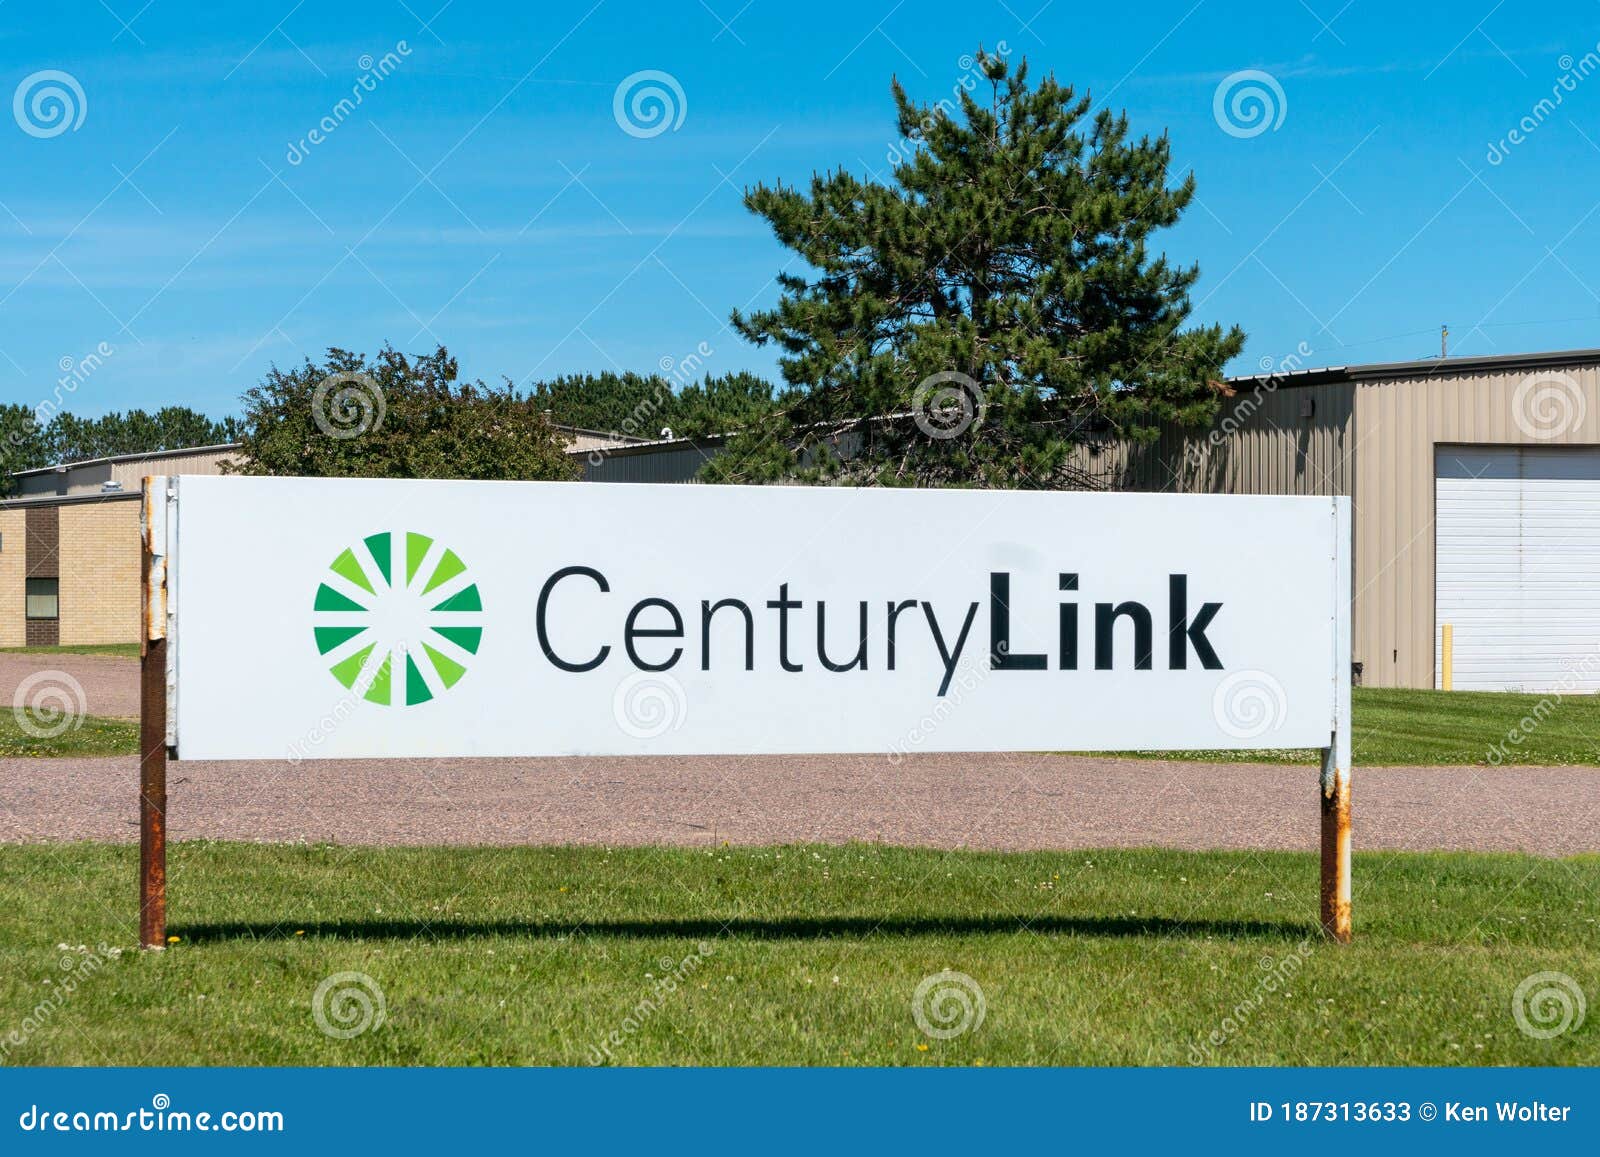 CenturyLink will pay $4 million to settle claims it overcharged Oregon  customers - oregonlive.com